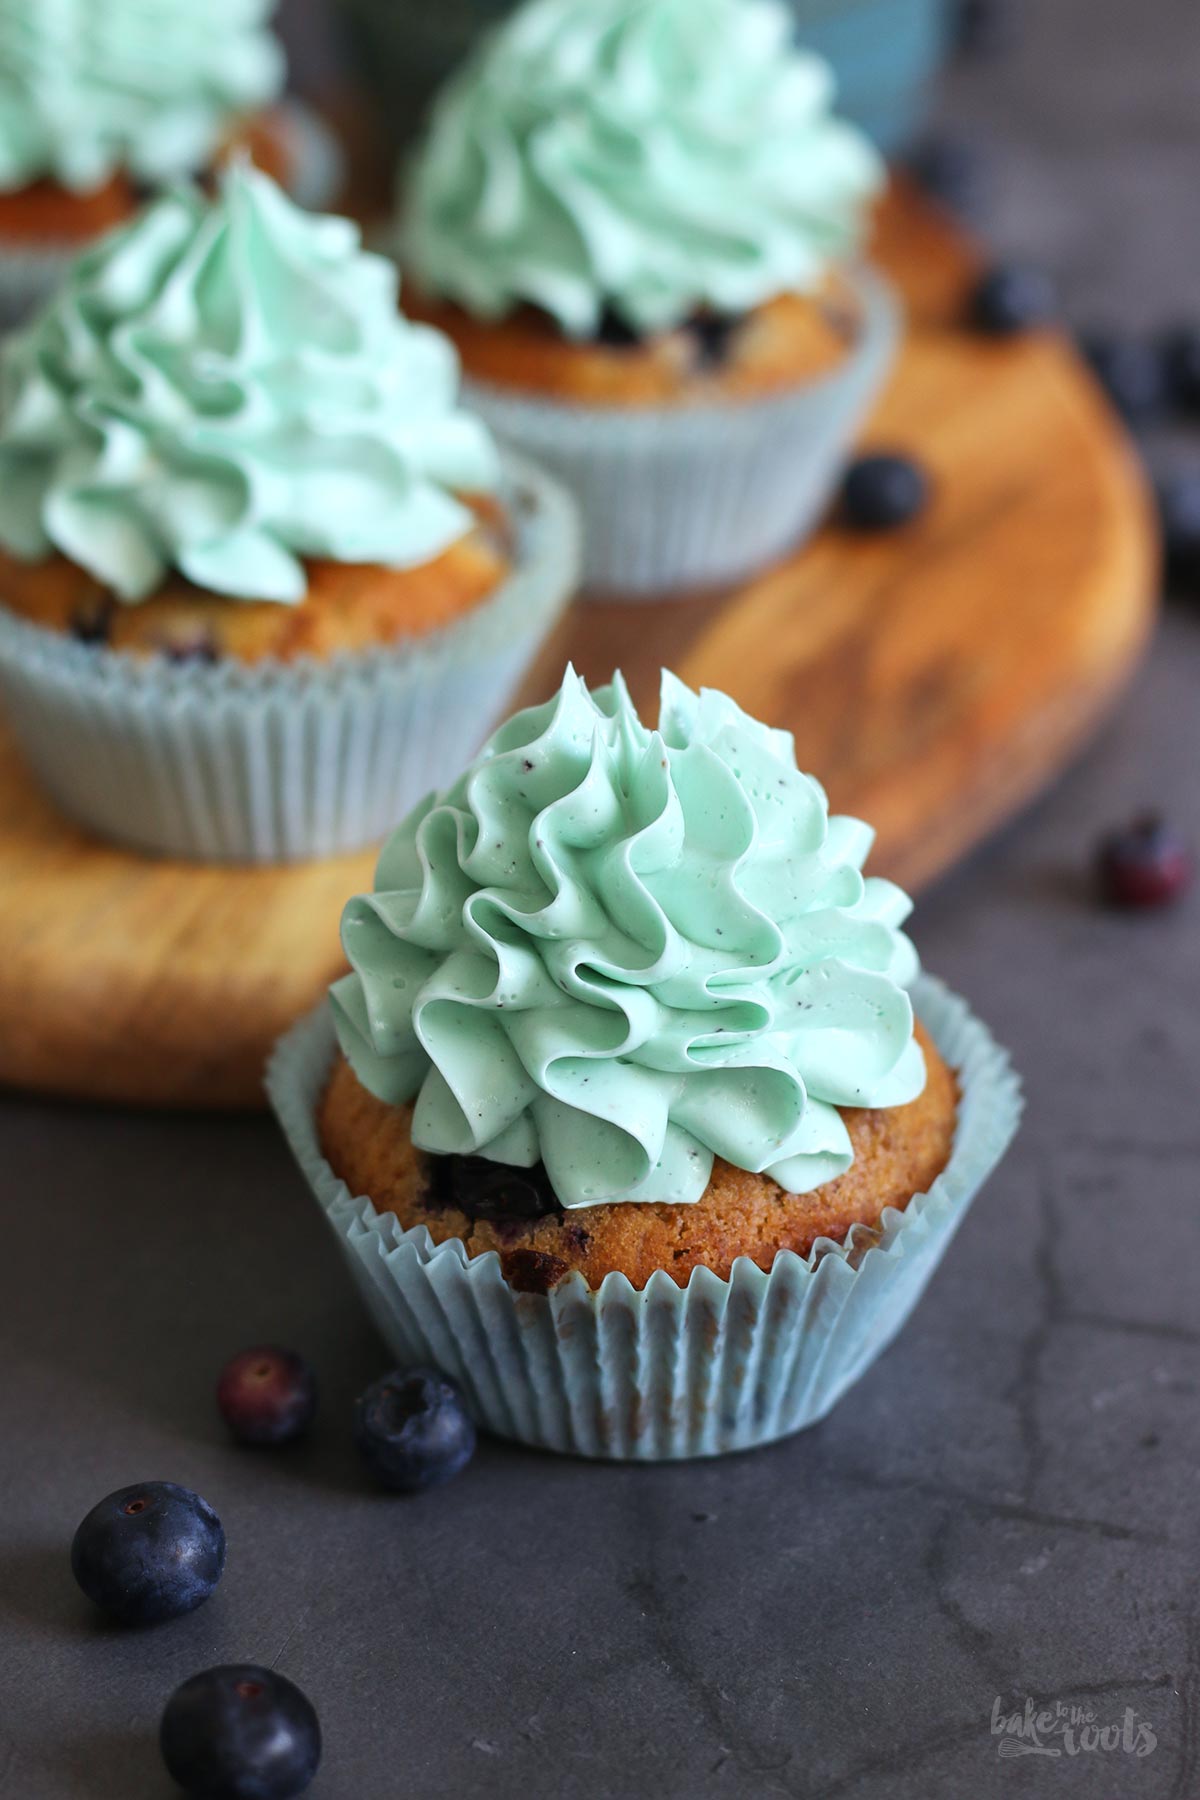 Vegan Blueberry Cupcakes | Bake to the roots